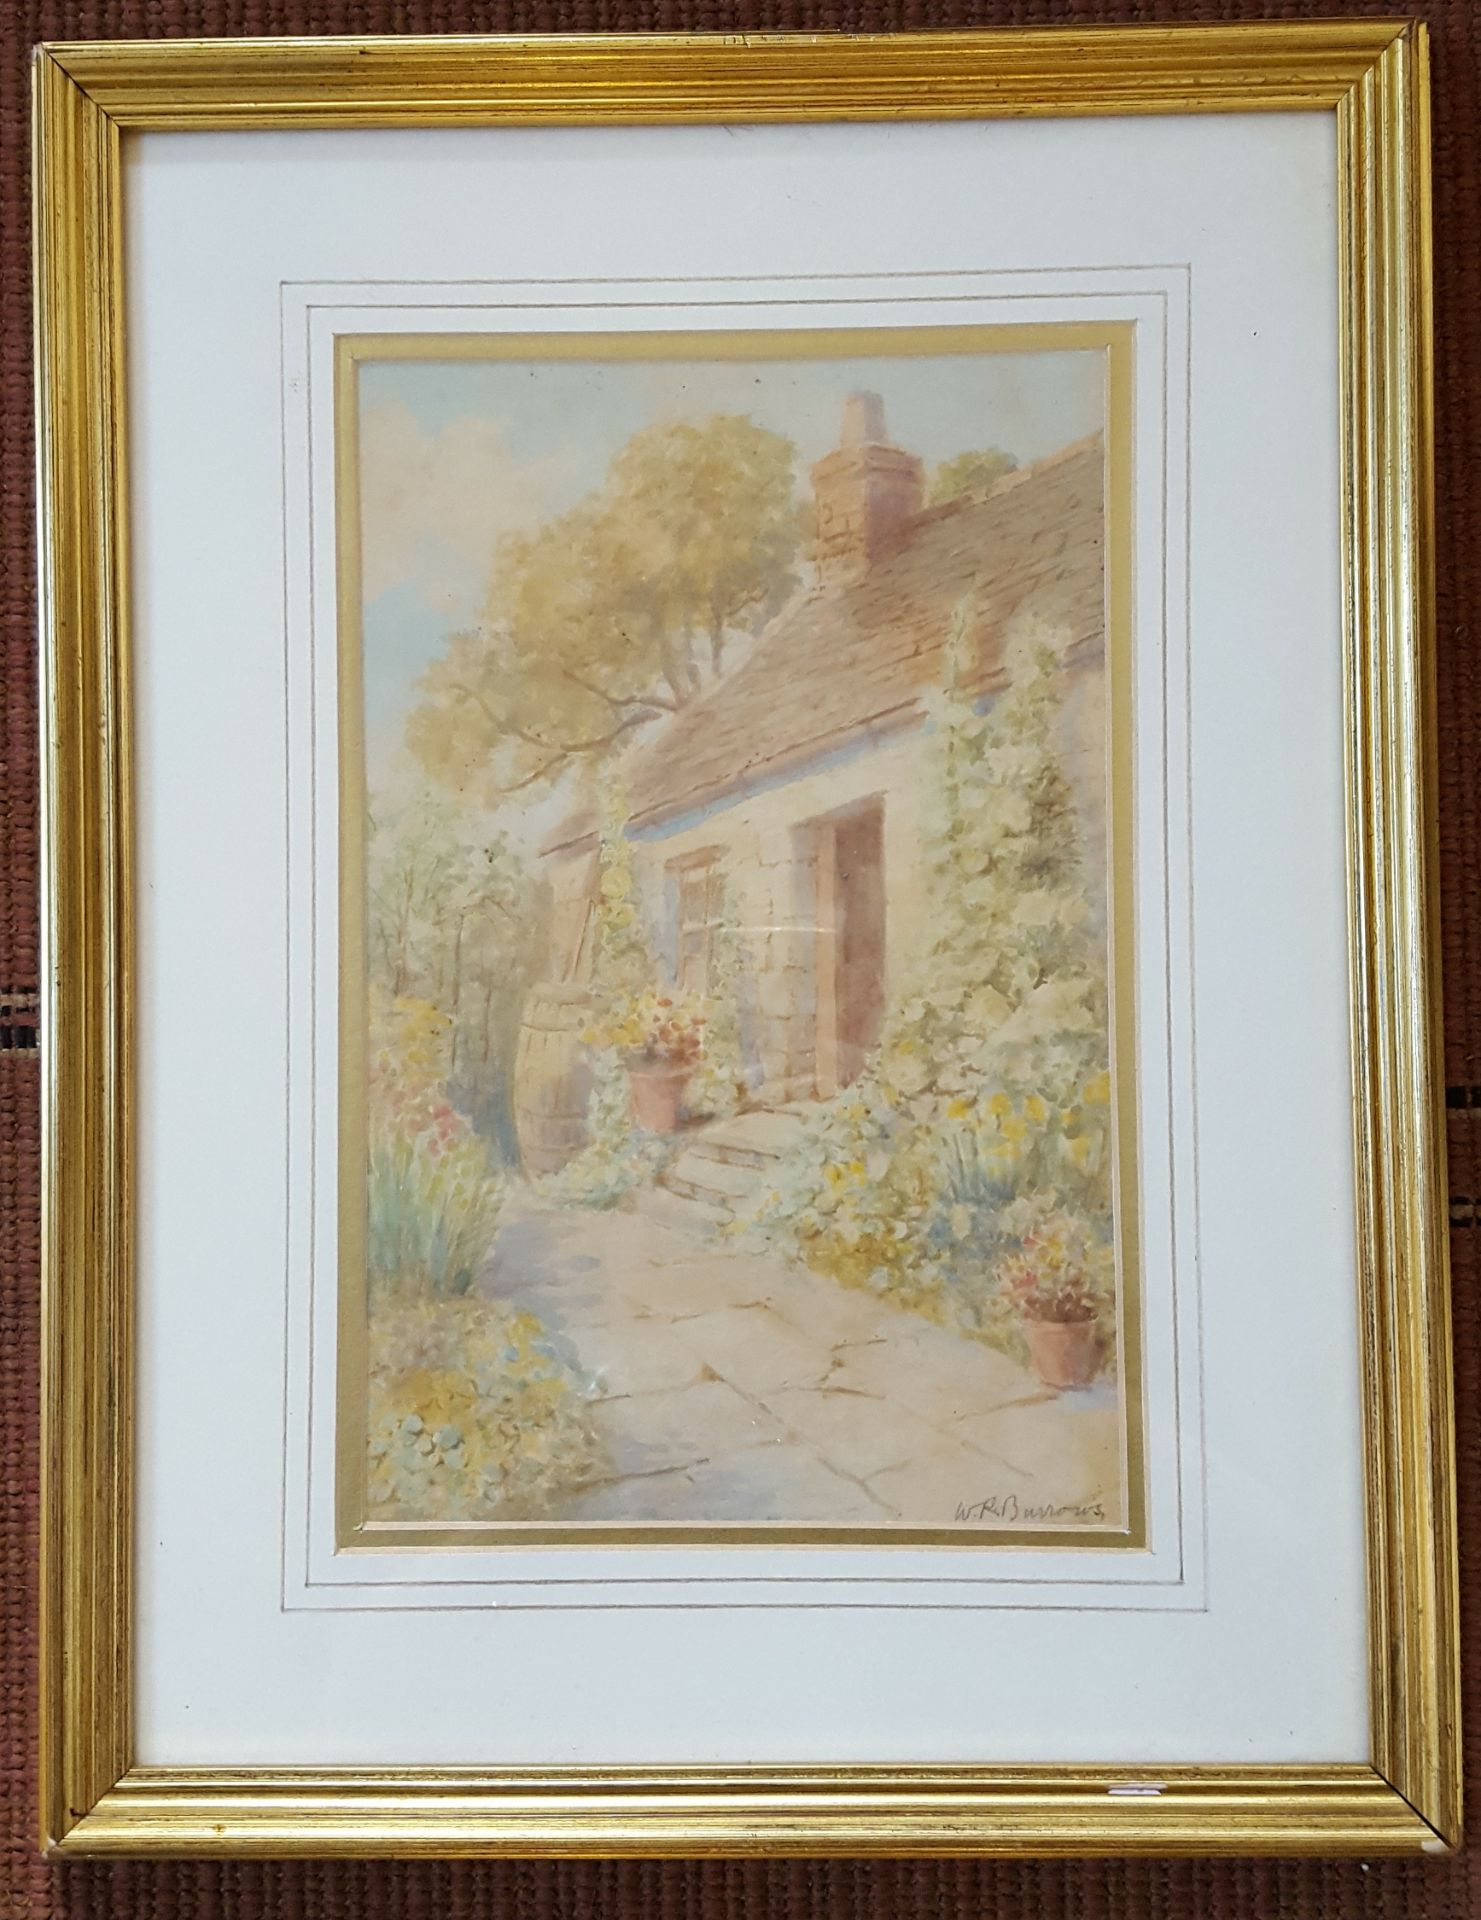 Vintage Watercolour Painting Titled 'Cottage Scene' Signed lower Right W. R. Burrows.